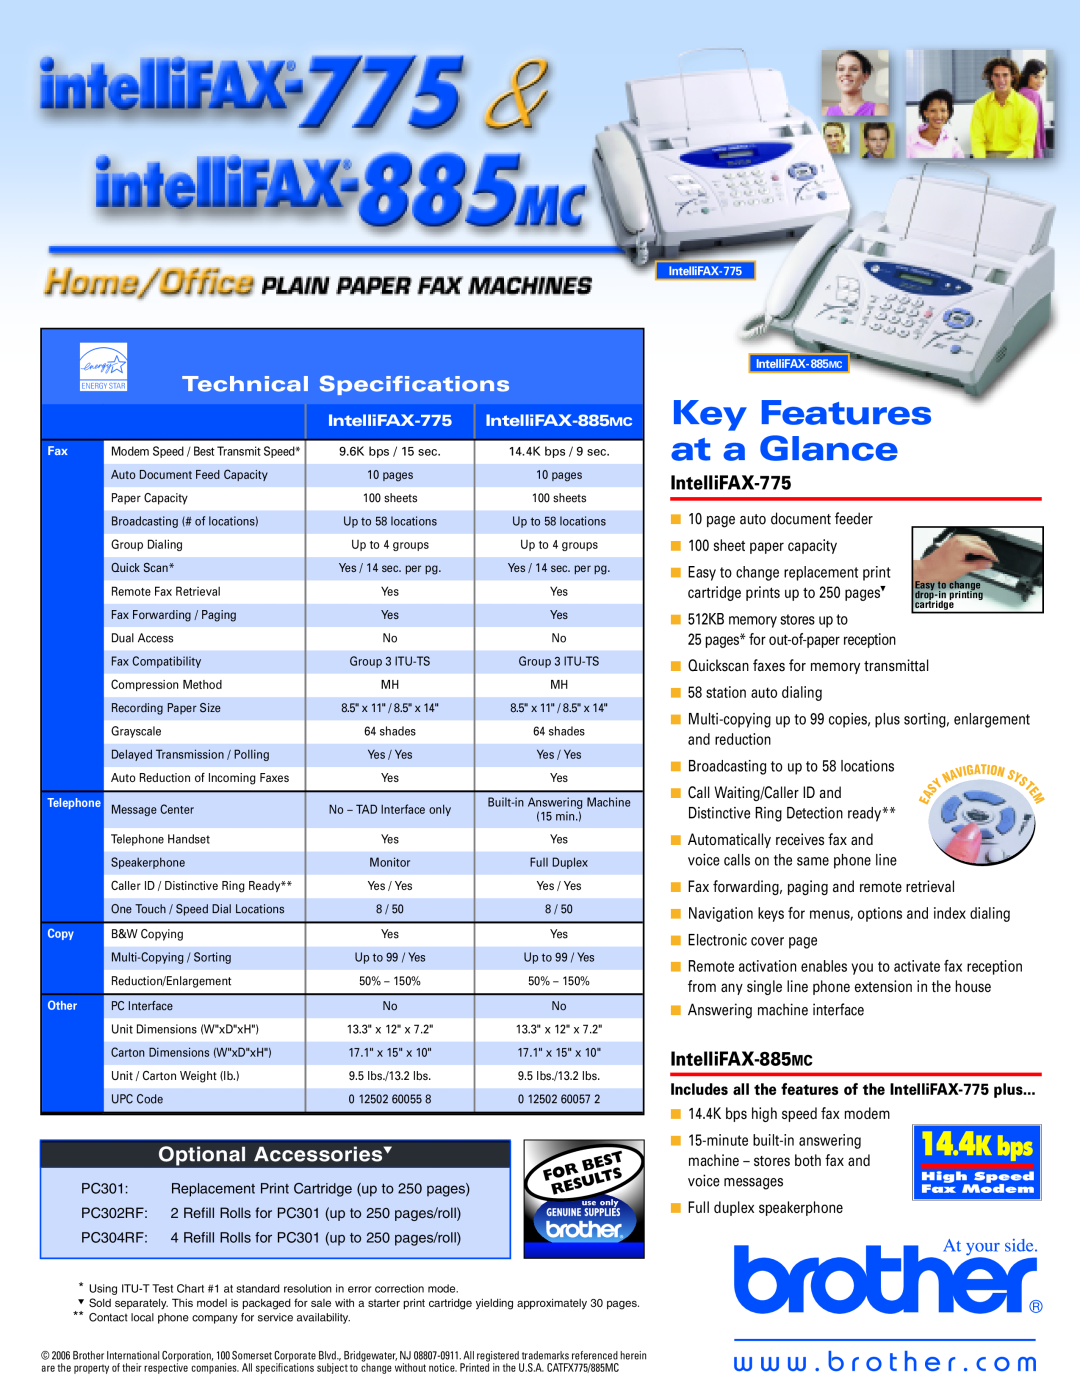 Brother Key Features at a Glance, Technical Specifications, IntelliFAX-775, Optional Accessories, IntelliFAX-885MC 